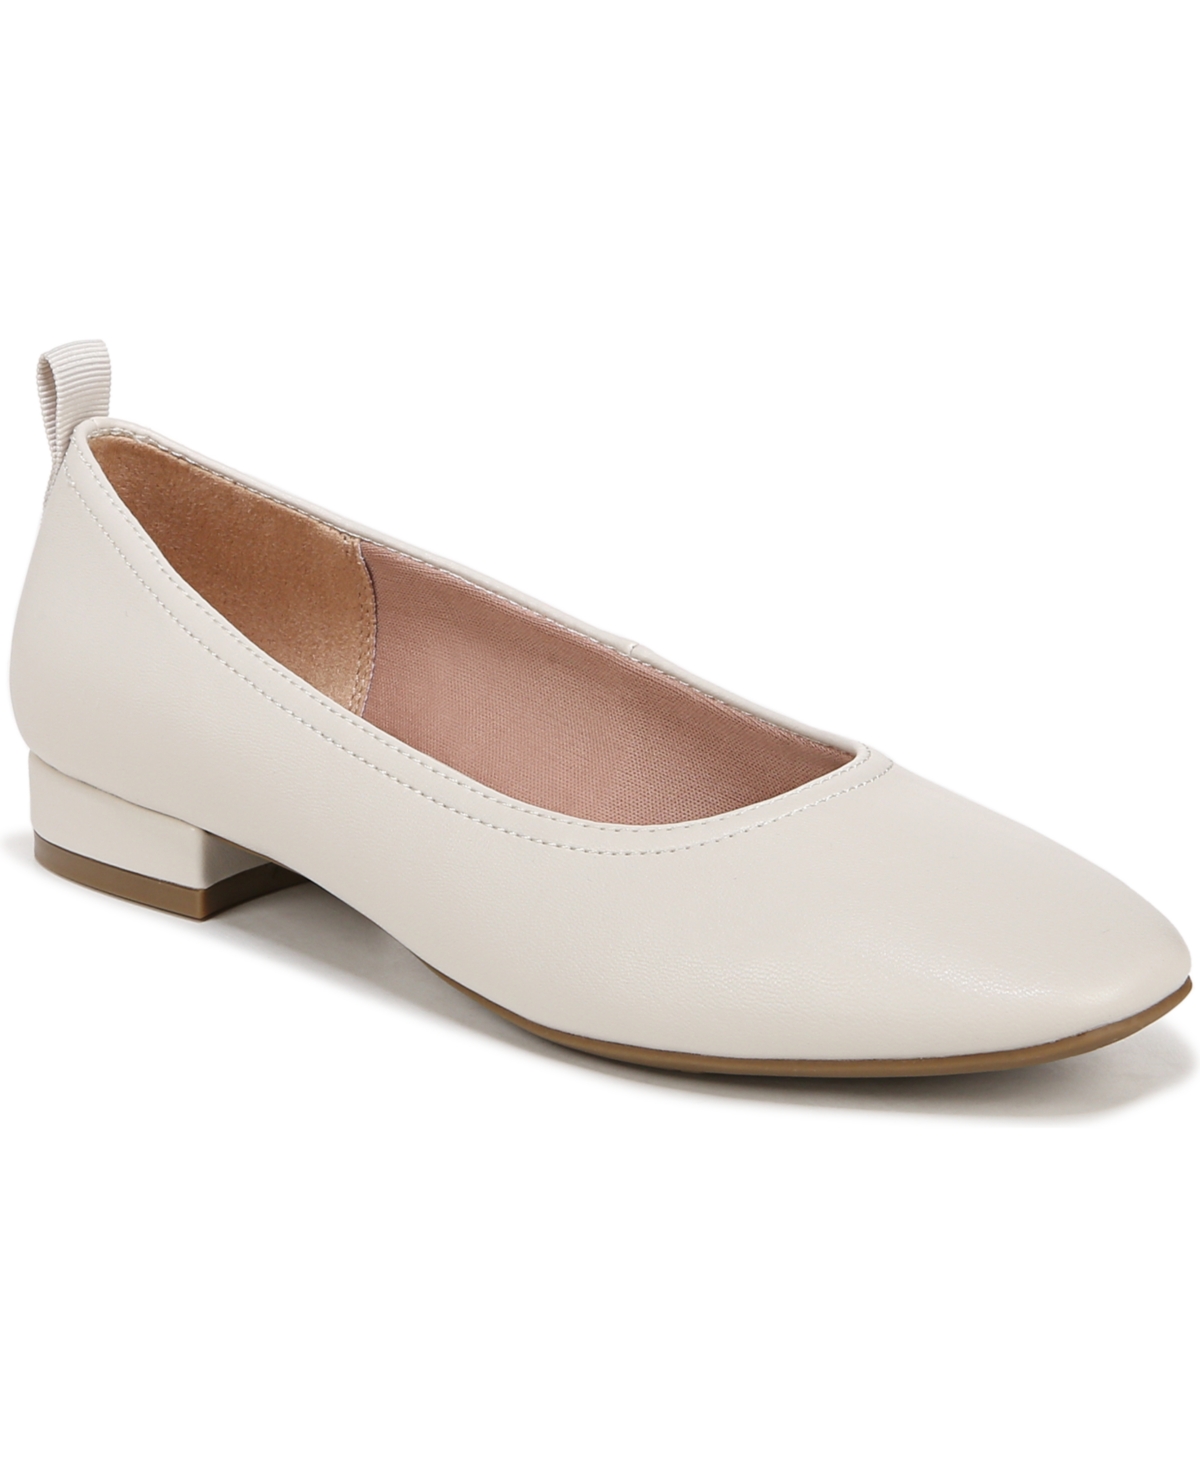 Lifestride Cameo Flats In Bone Beige Faux Leather